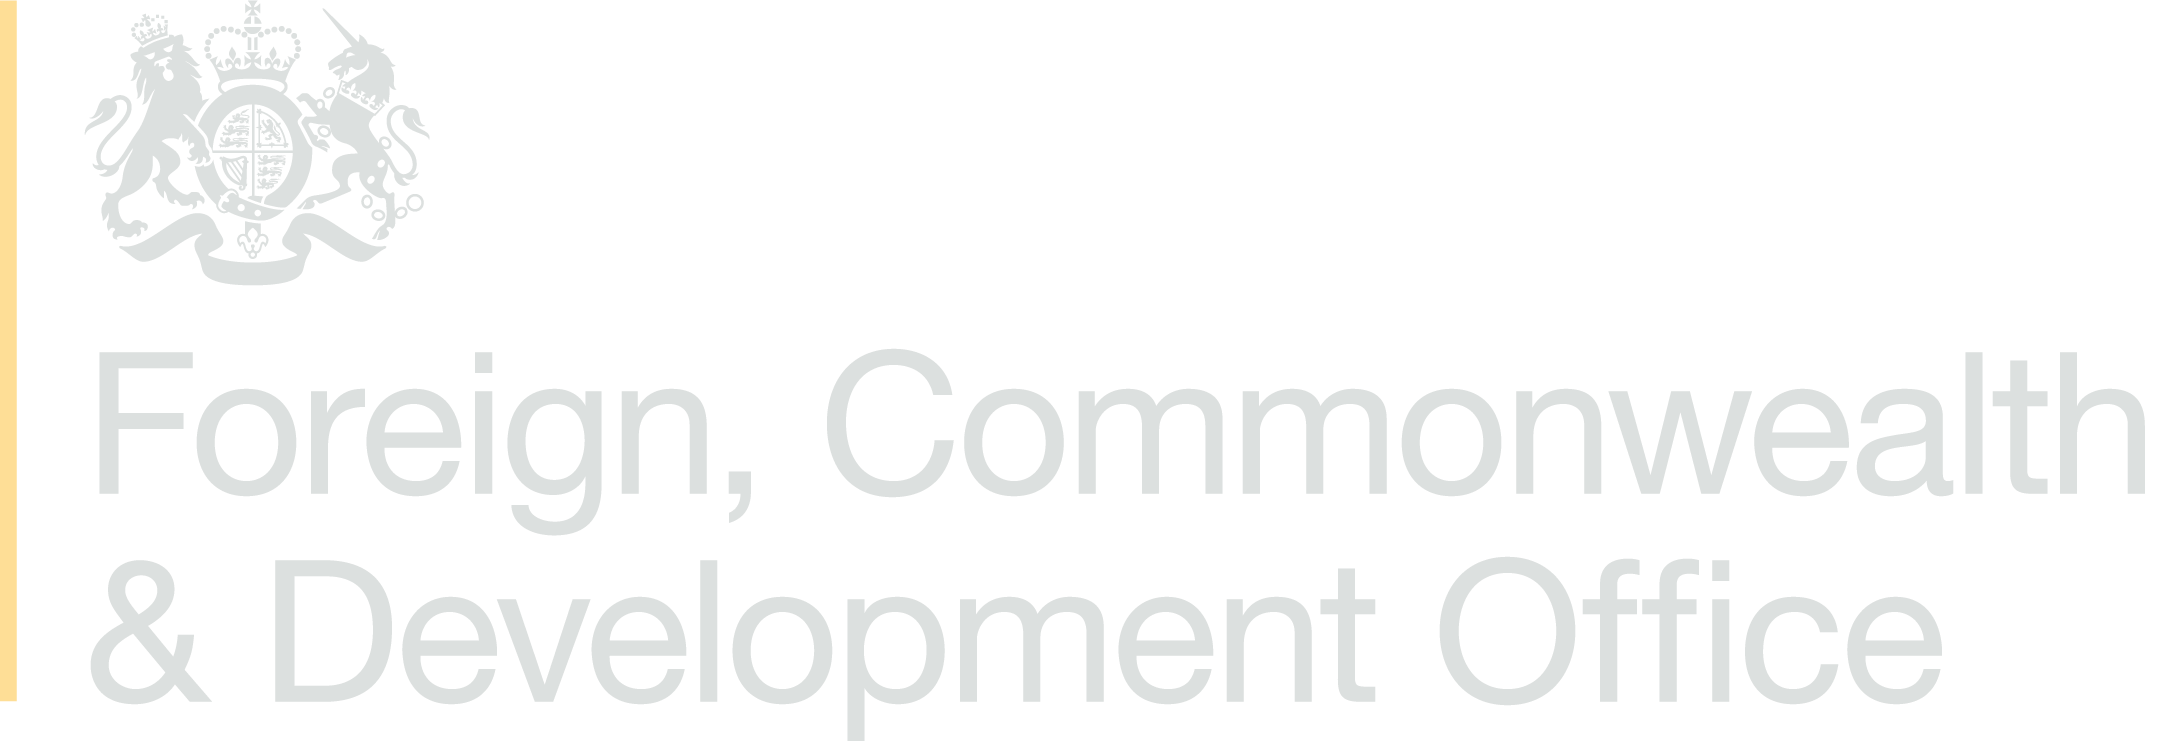 Foriegn, Commonwealth and Development Office logo